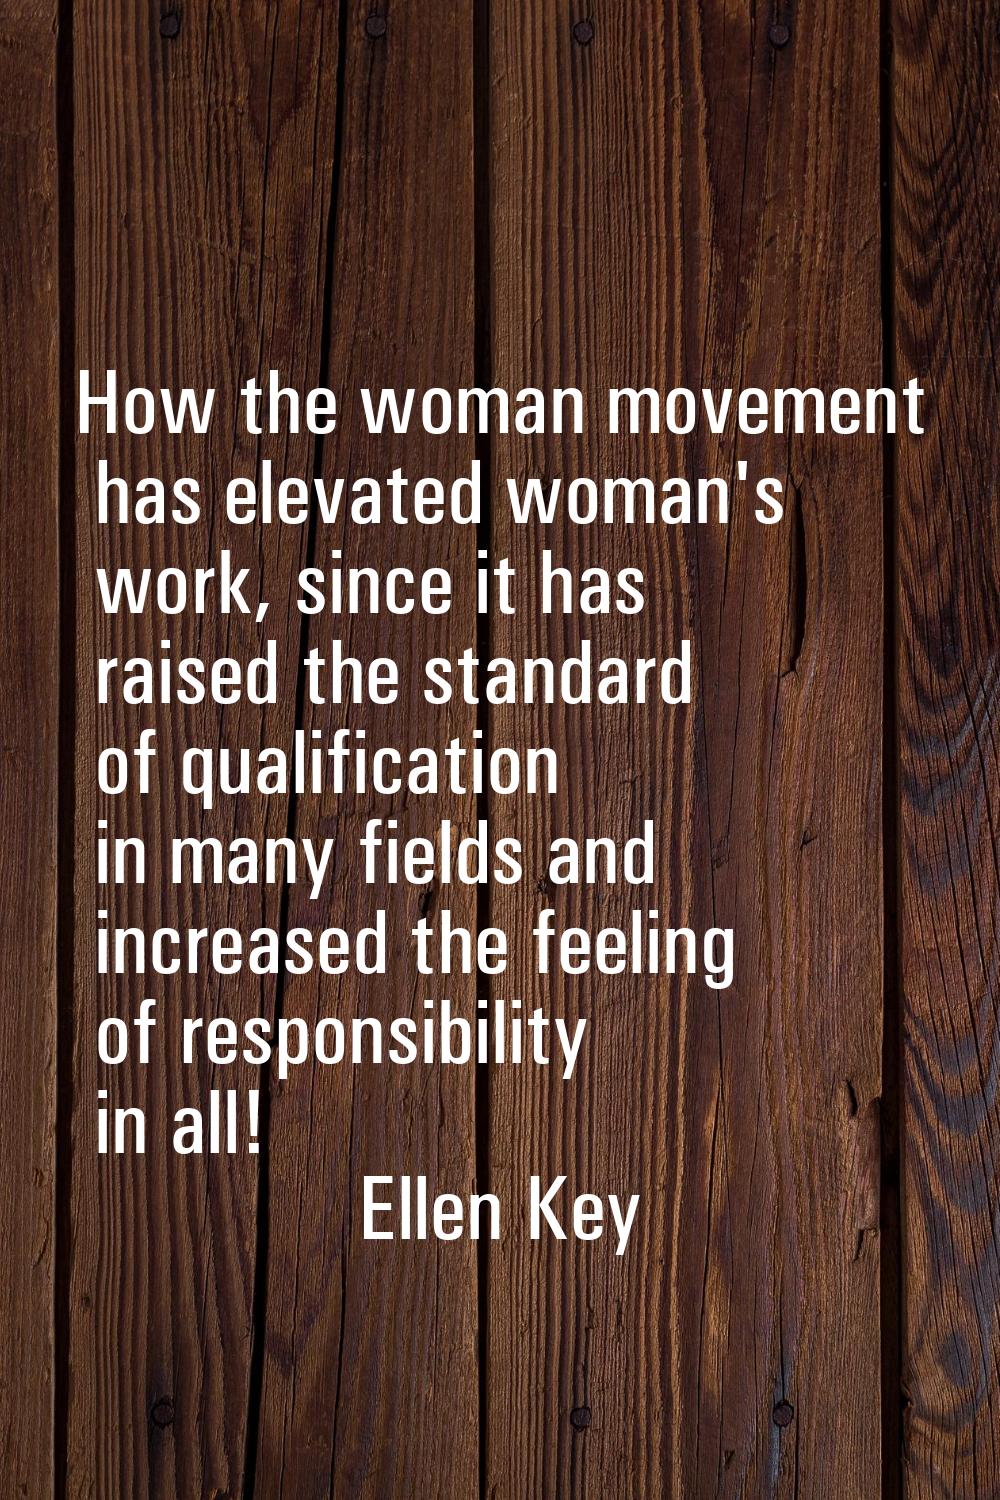 How the woman movement has elevated woman's work, since it has raised the standard of qualification